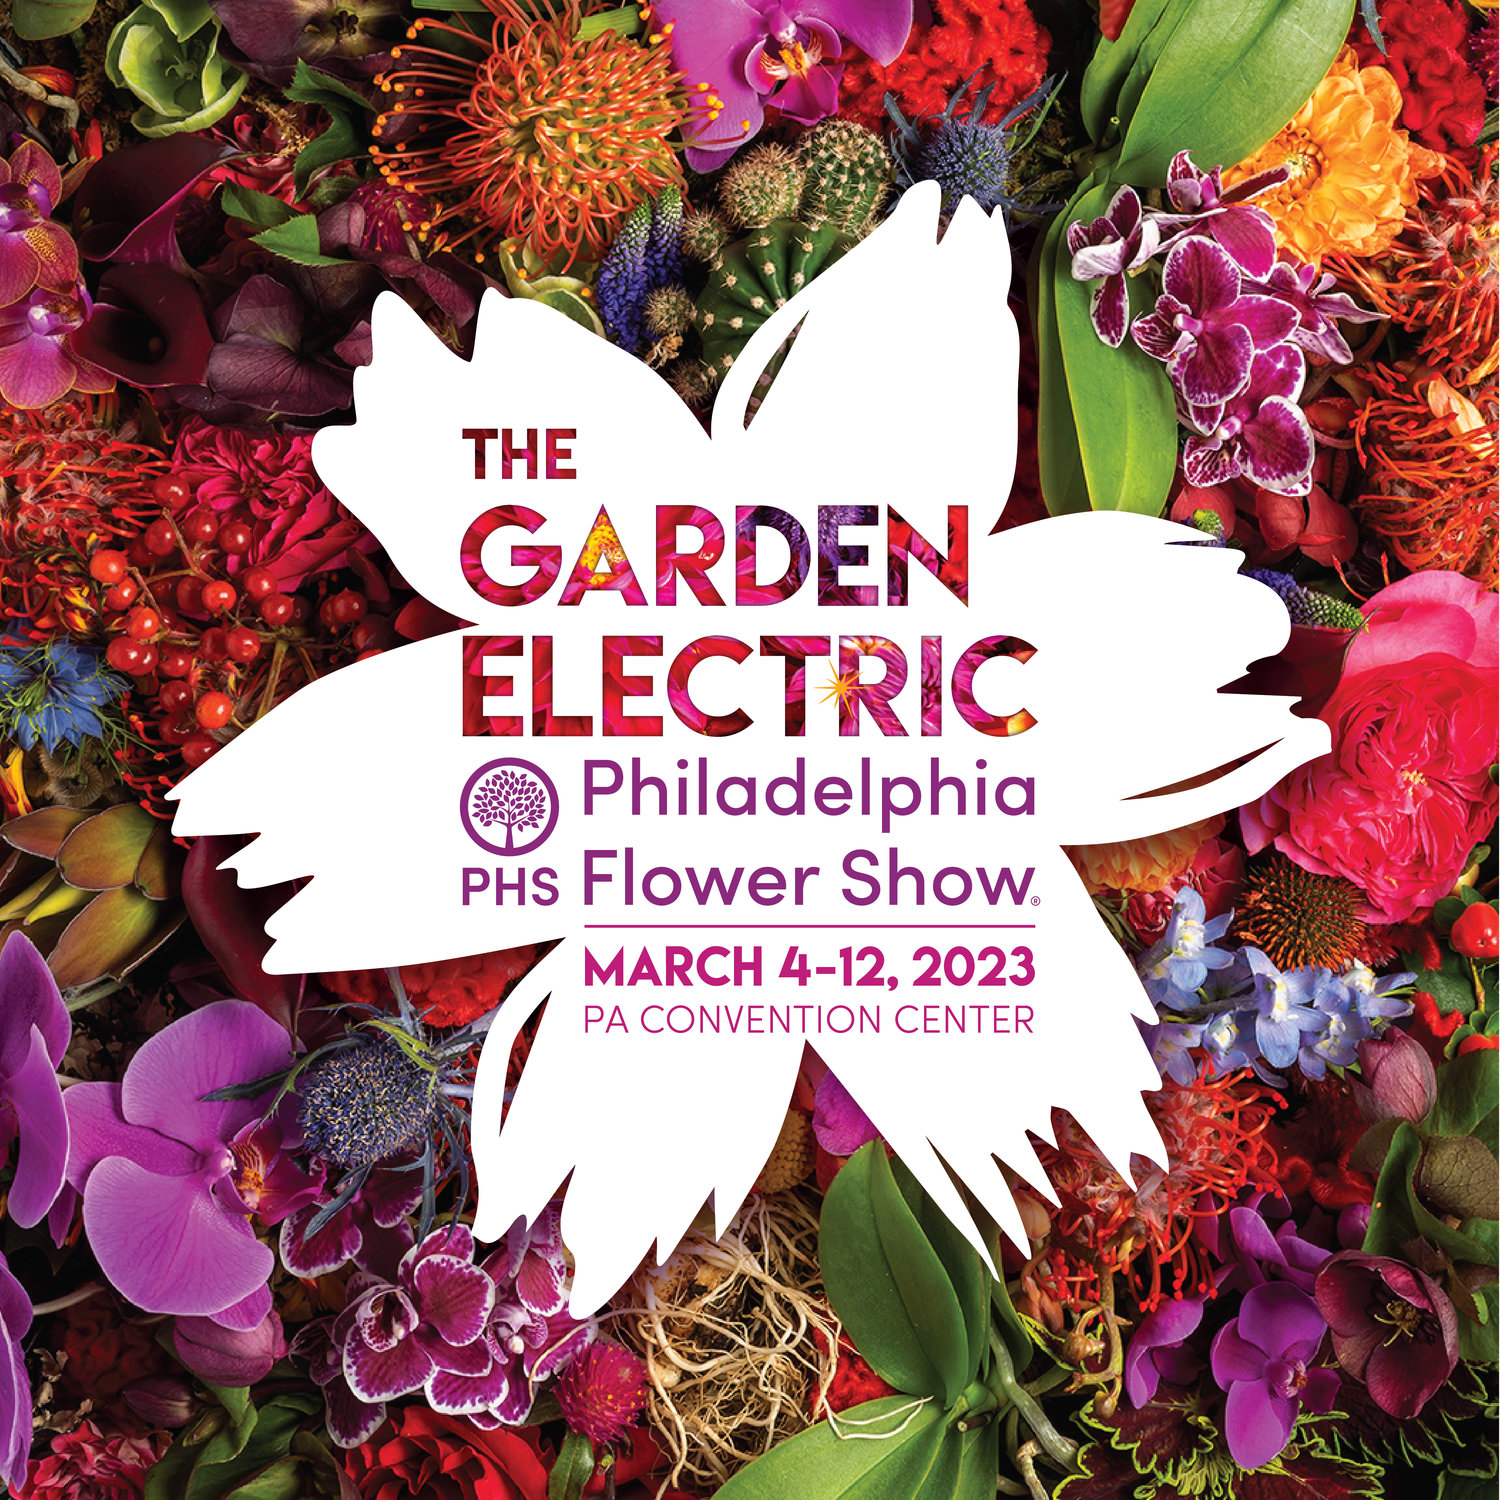 The Pennsylvania Horticultural Society has announced the theme of the 2023 Philadelphia Flower Show: “The Garden Electric.”